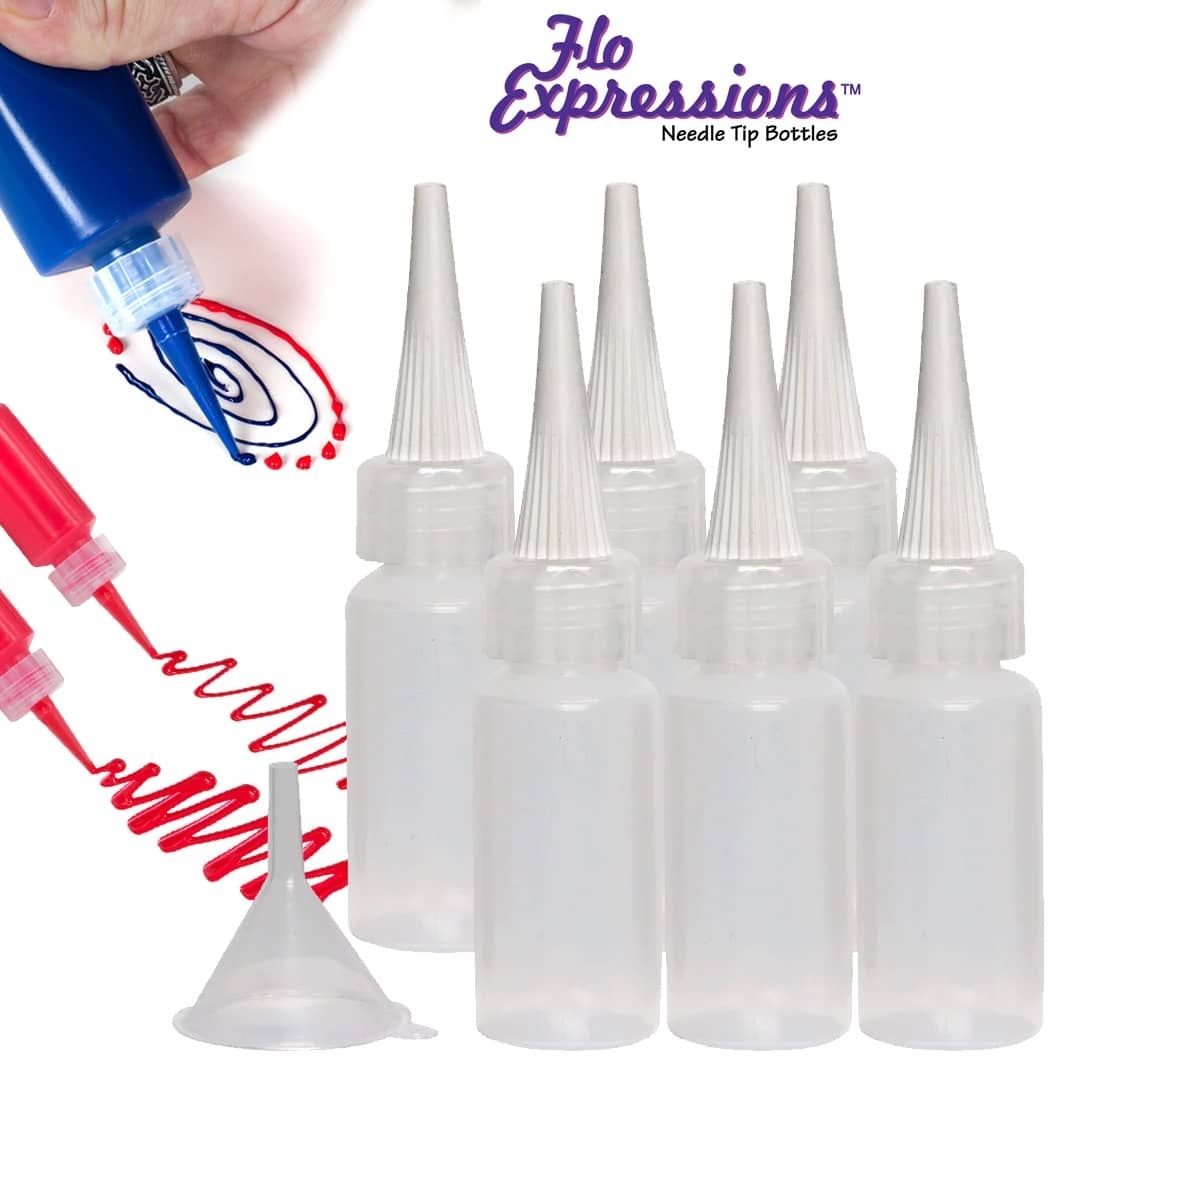 Creative Mark Flo Expressions Bottles and Funnel - Artist Paint Bottles Detailing Bottles Multipack w/Funnel for Fine Lines and Small Details 